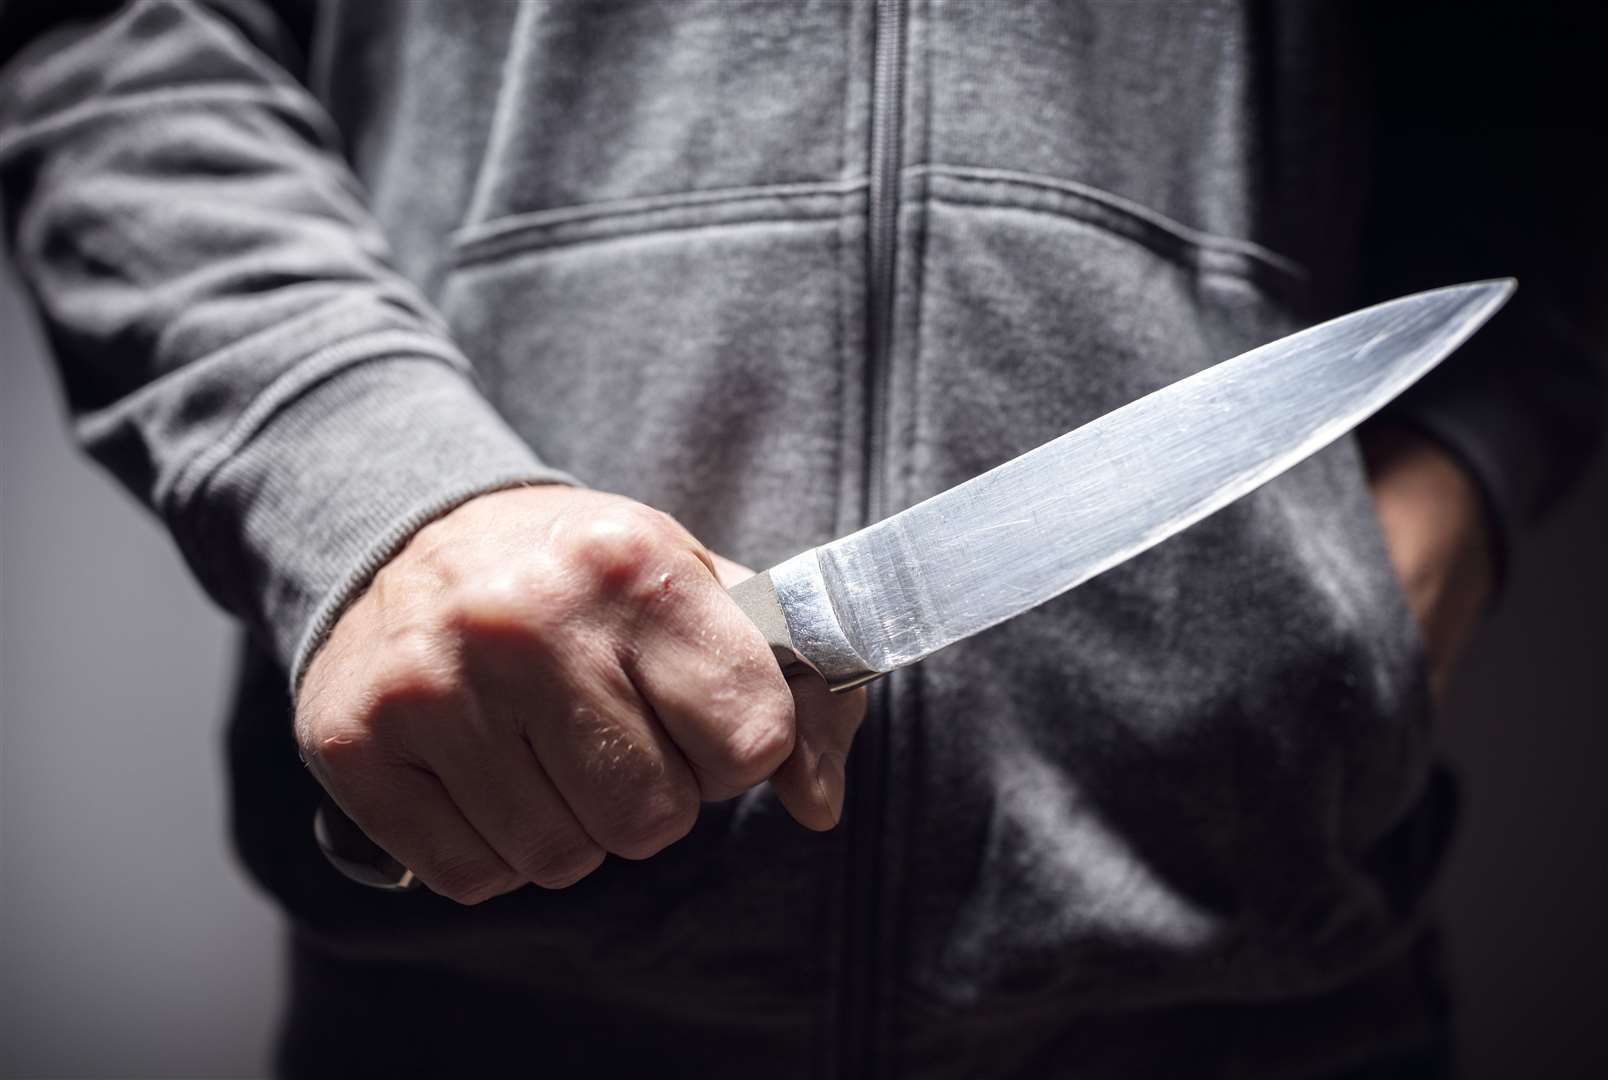 County lines drug dealing and knife crime is also on the up in Kent